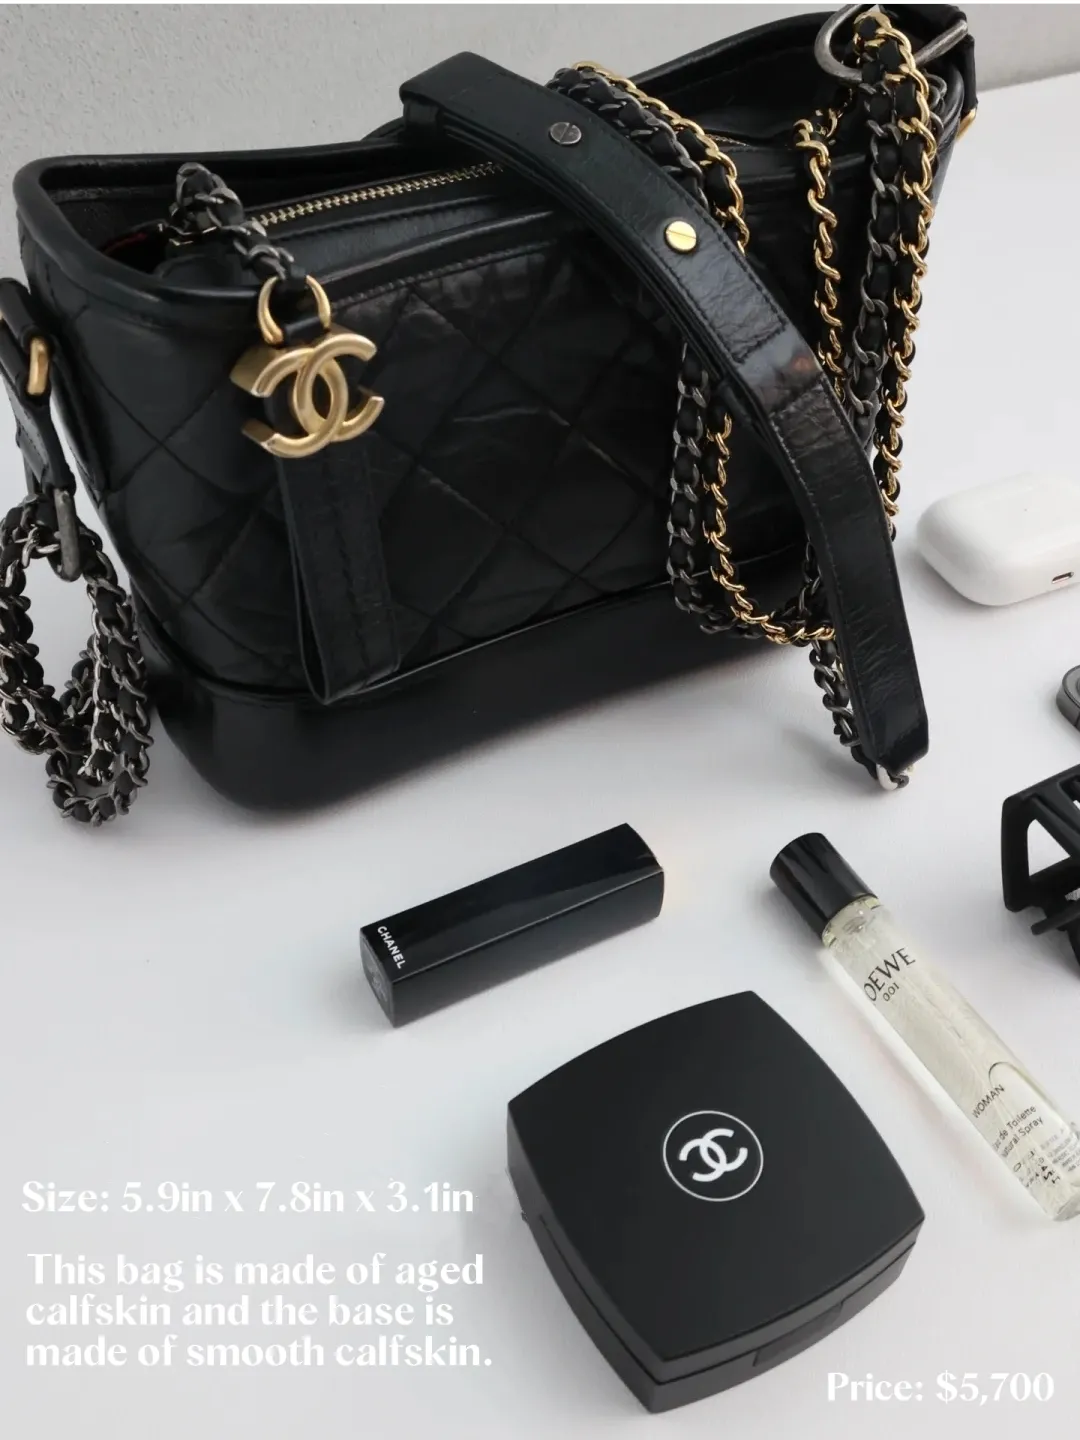 ⚫CHANEL Small Gabrielle Hobo in Black Bag Review👜